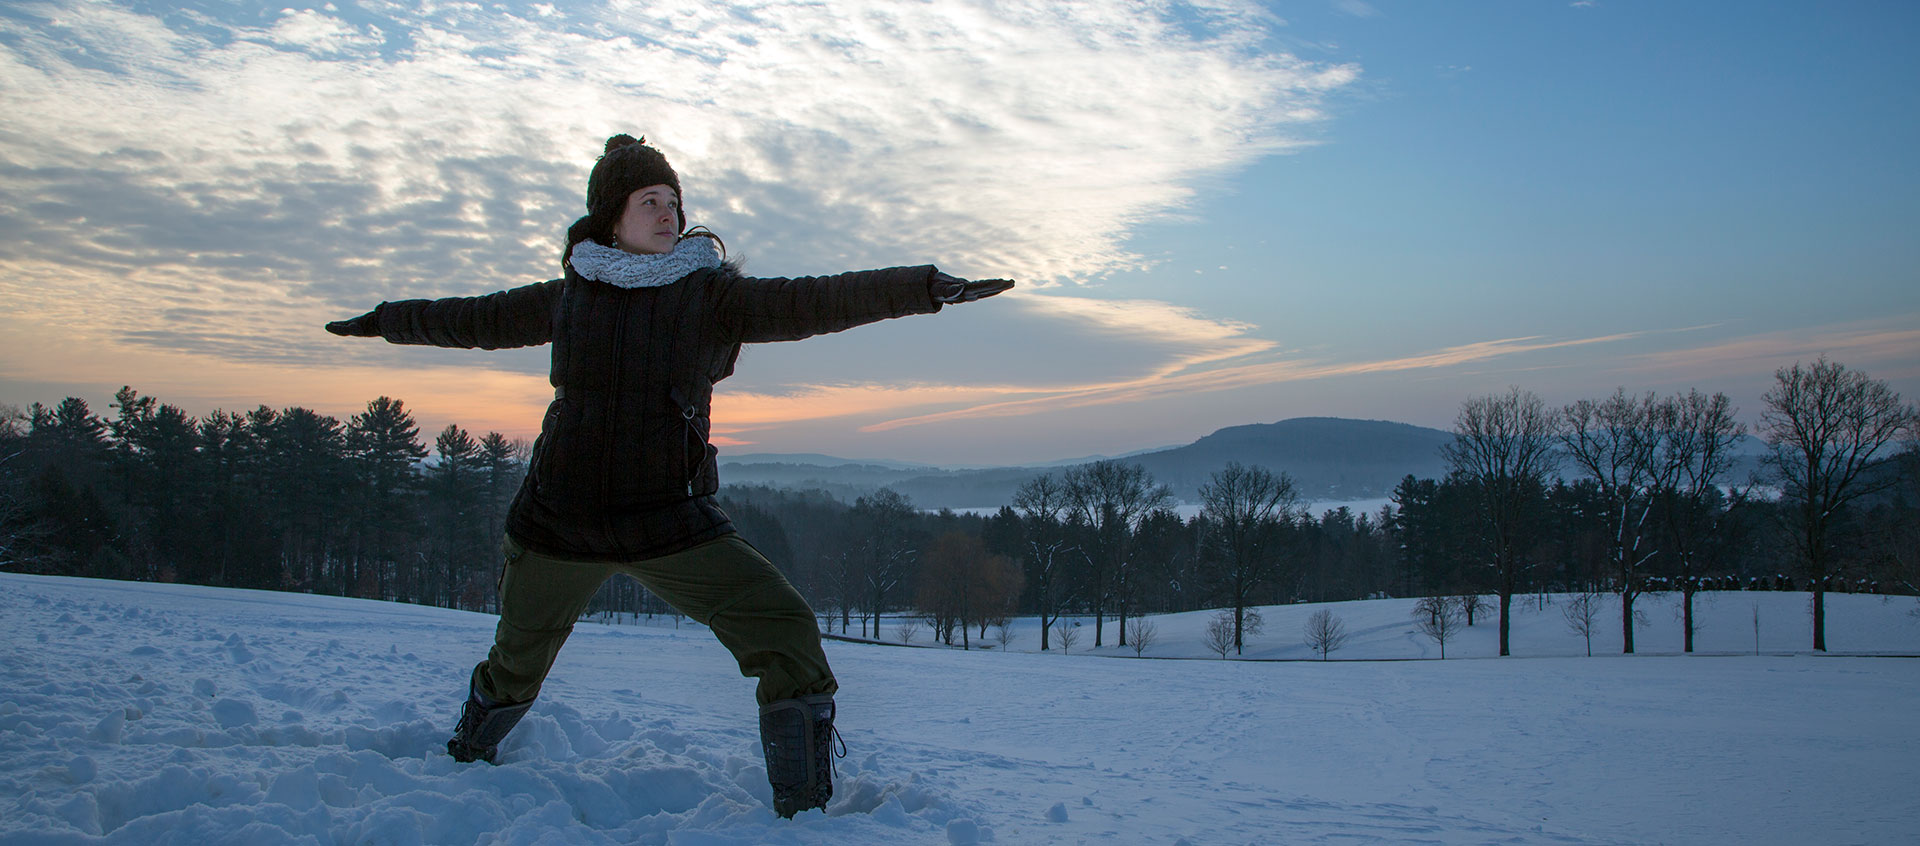 Why I Love Being in Nature | Kripalu